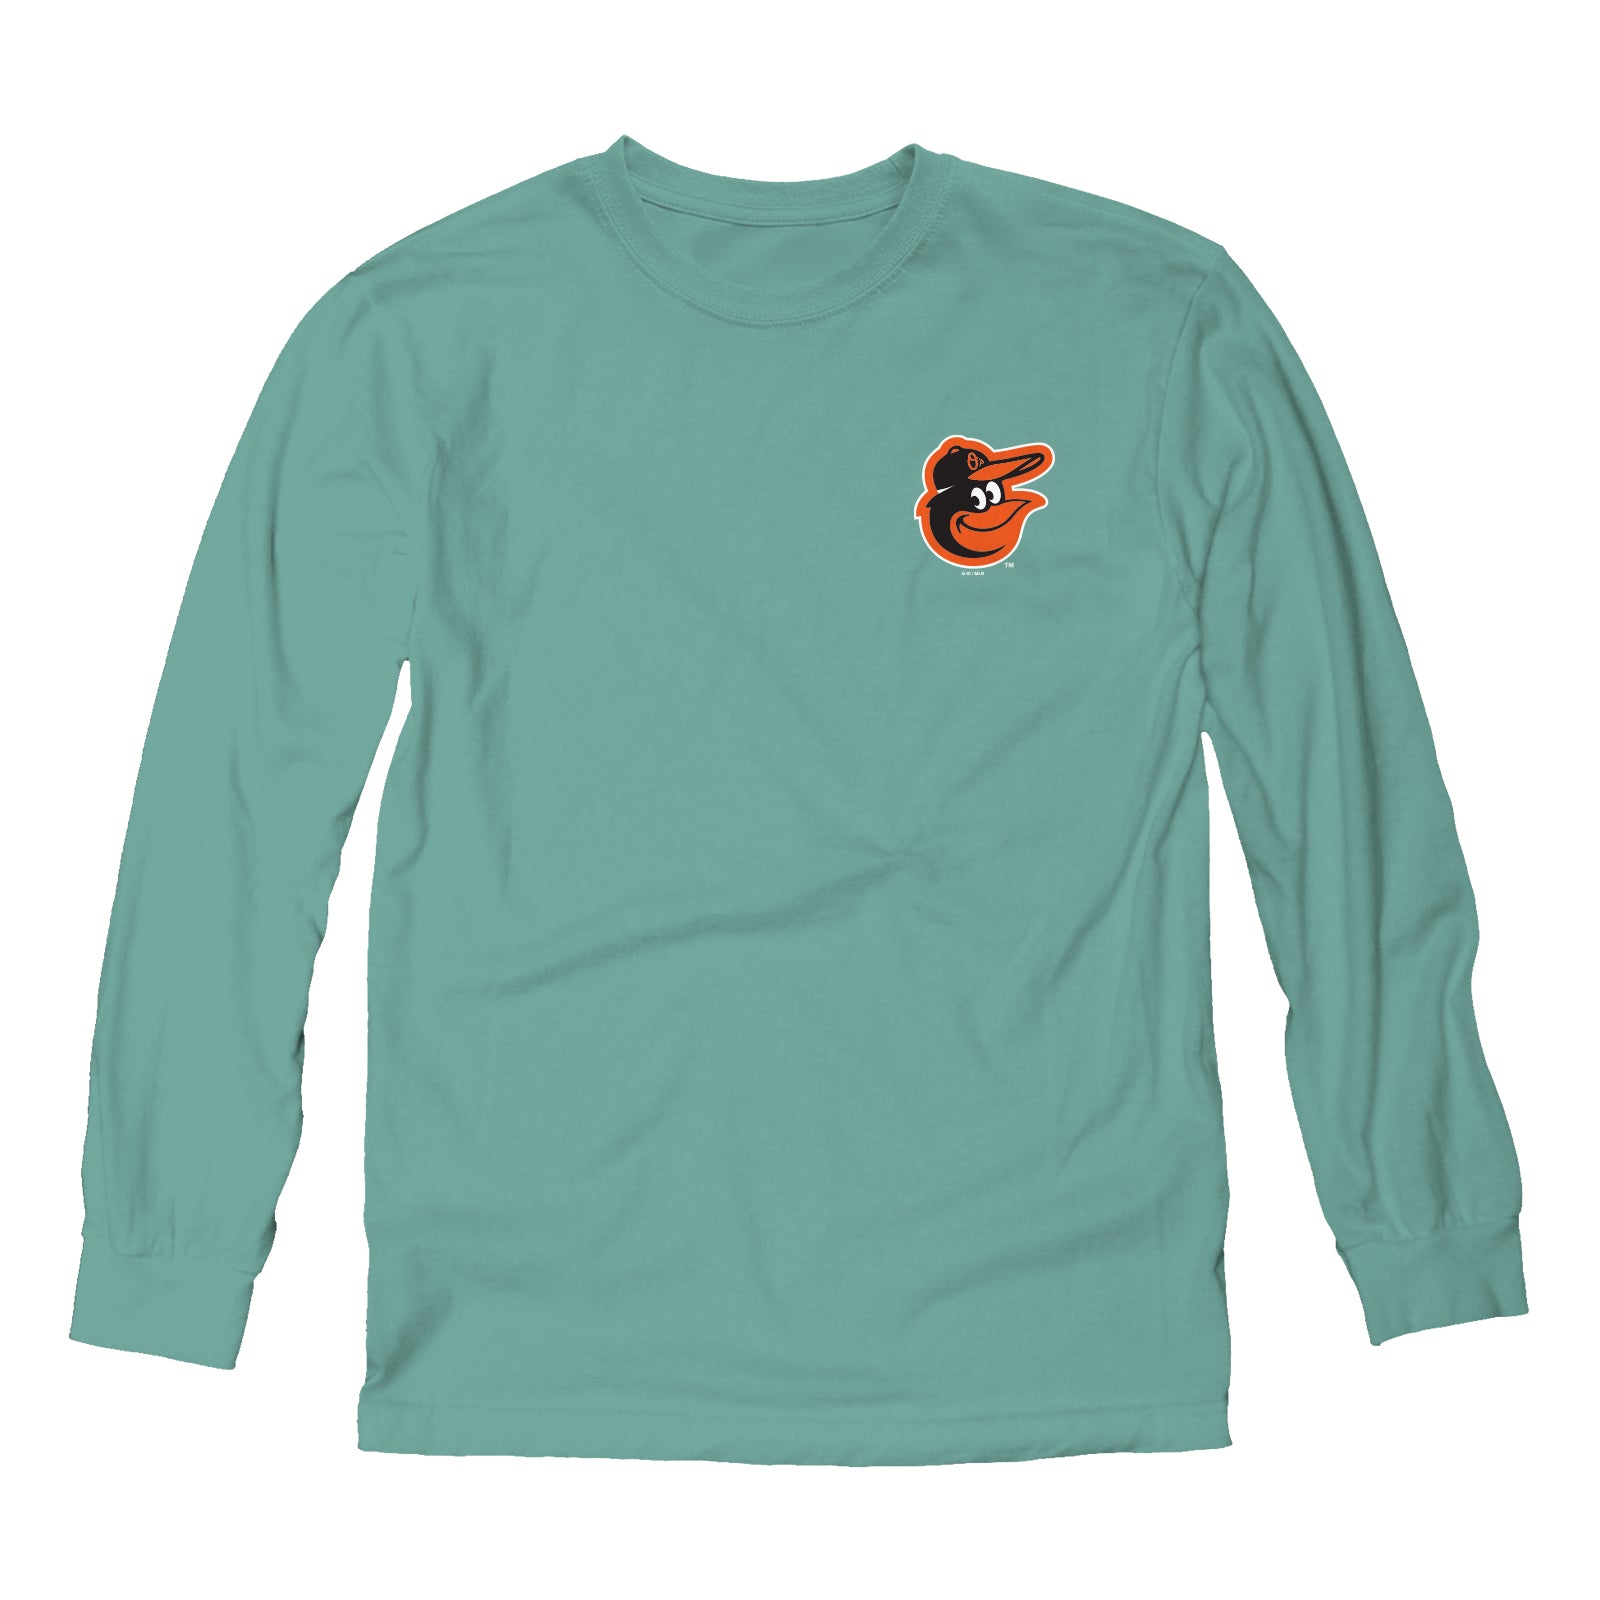 BALTIMORE ORIOLES 7th INNING STRETCH LONG SLEEVE T-SHIRT